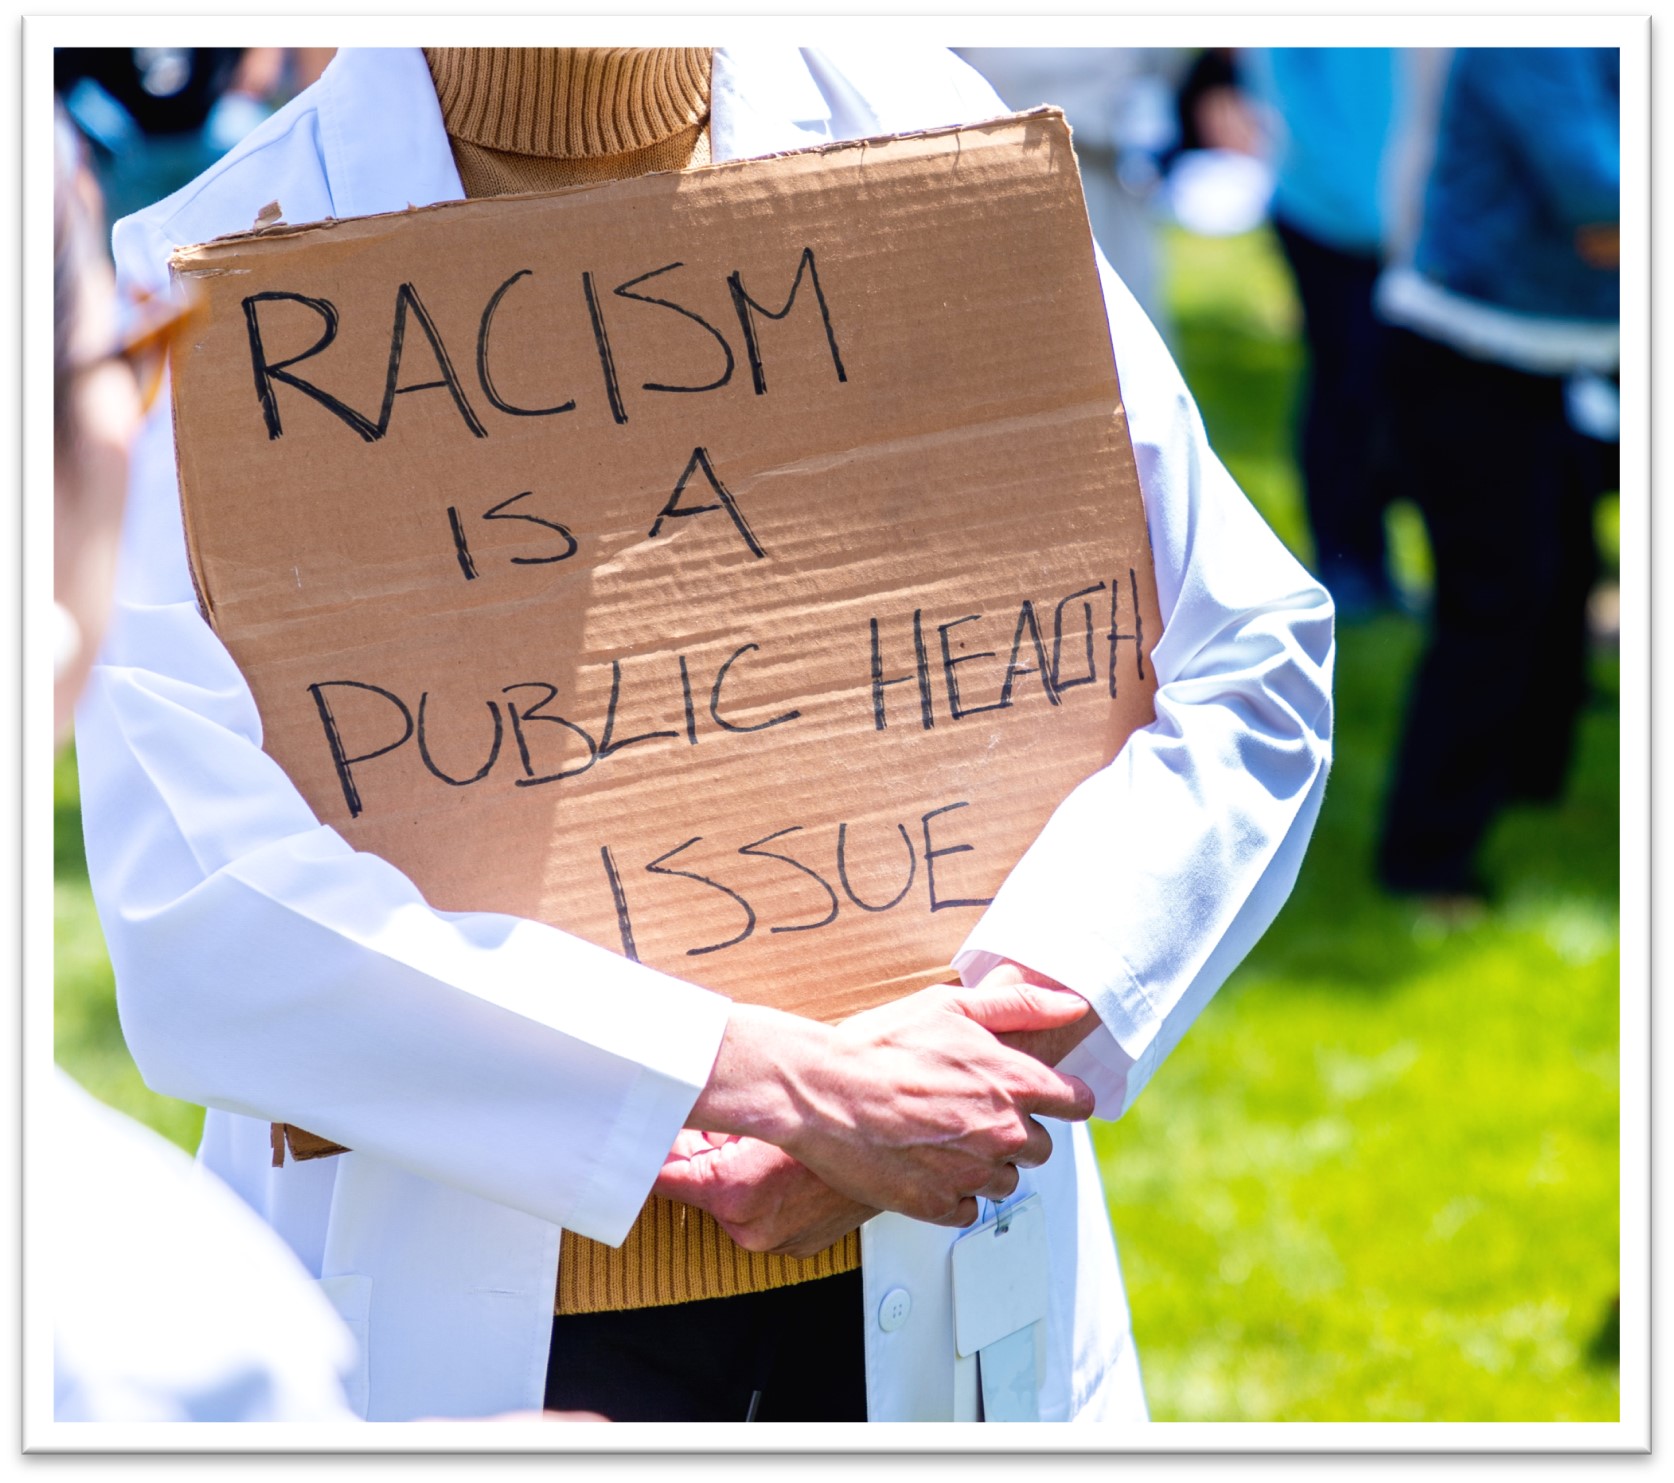 Person Carrying Racism is a Public Health Issue Sign